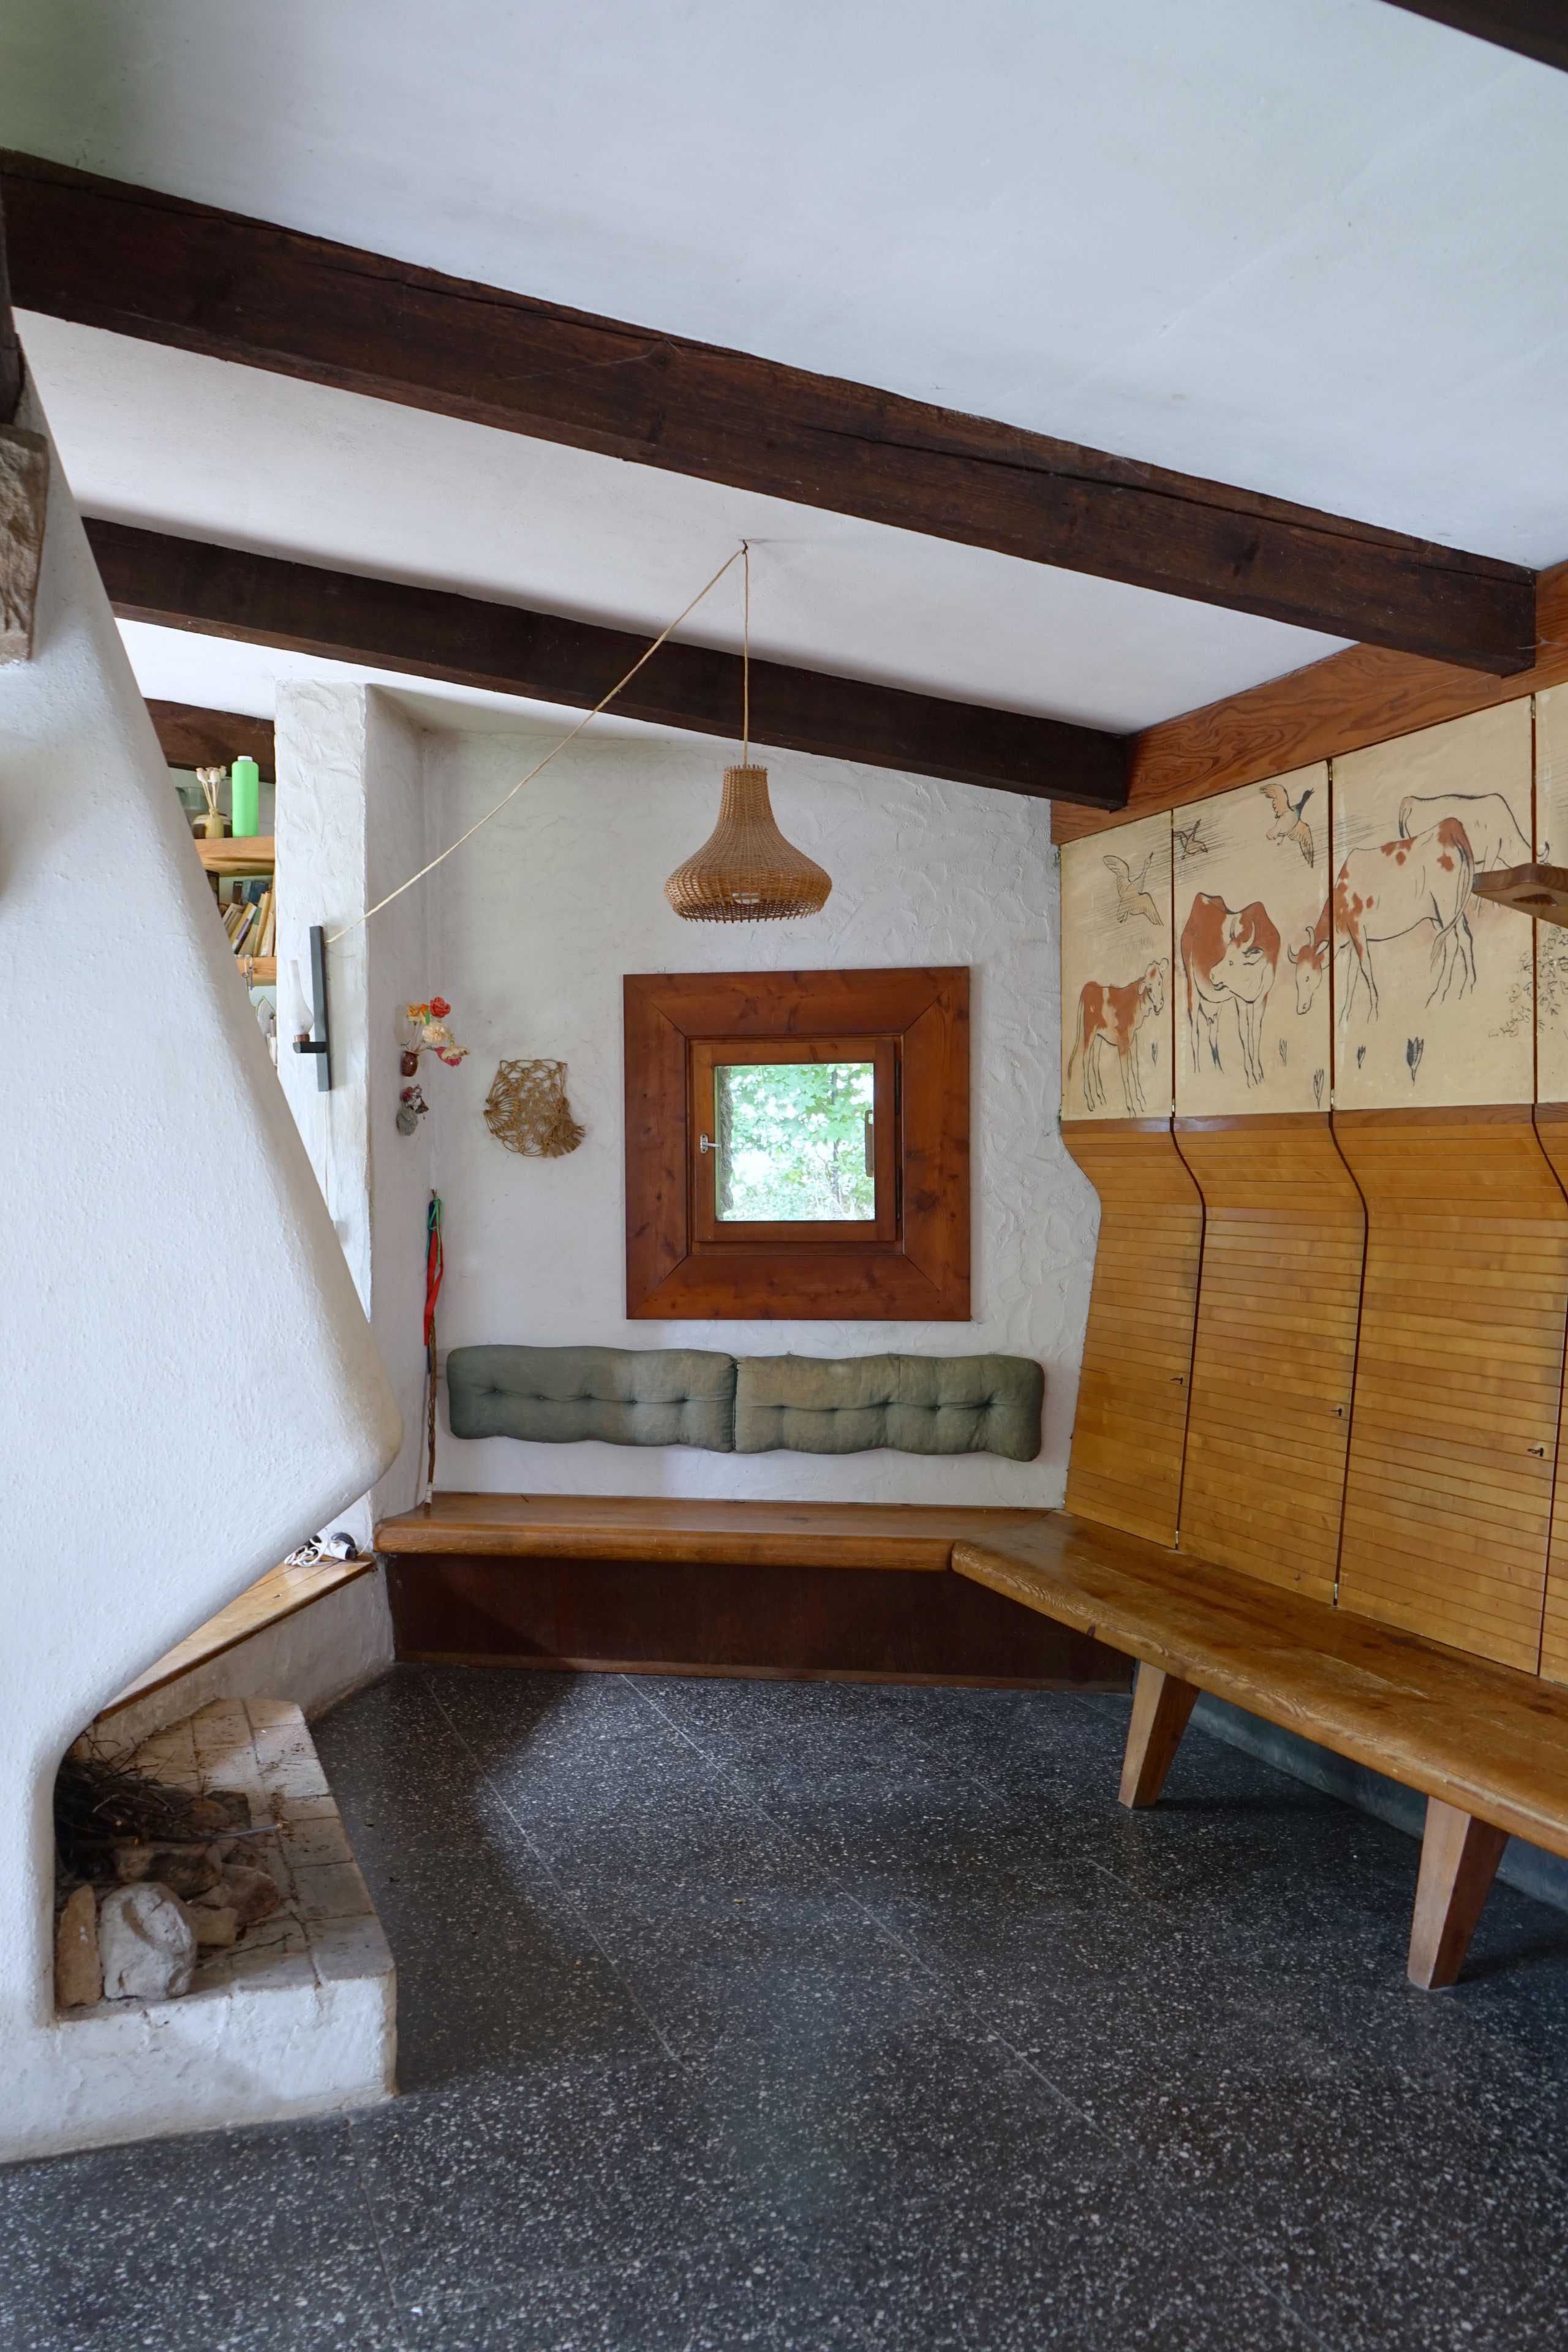 Czech summer houses. Indoors Interior Design Floor Flooring Wood Lamp Bench Furniture Plywood and Architecture